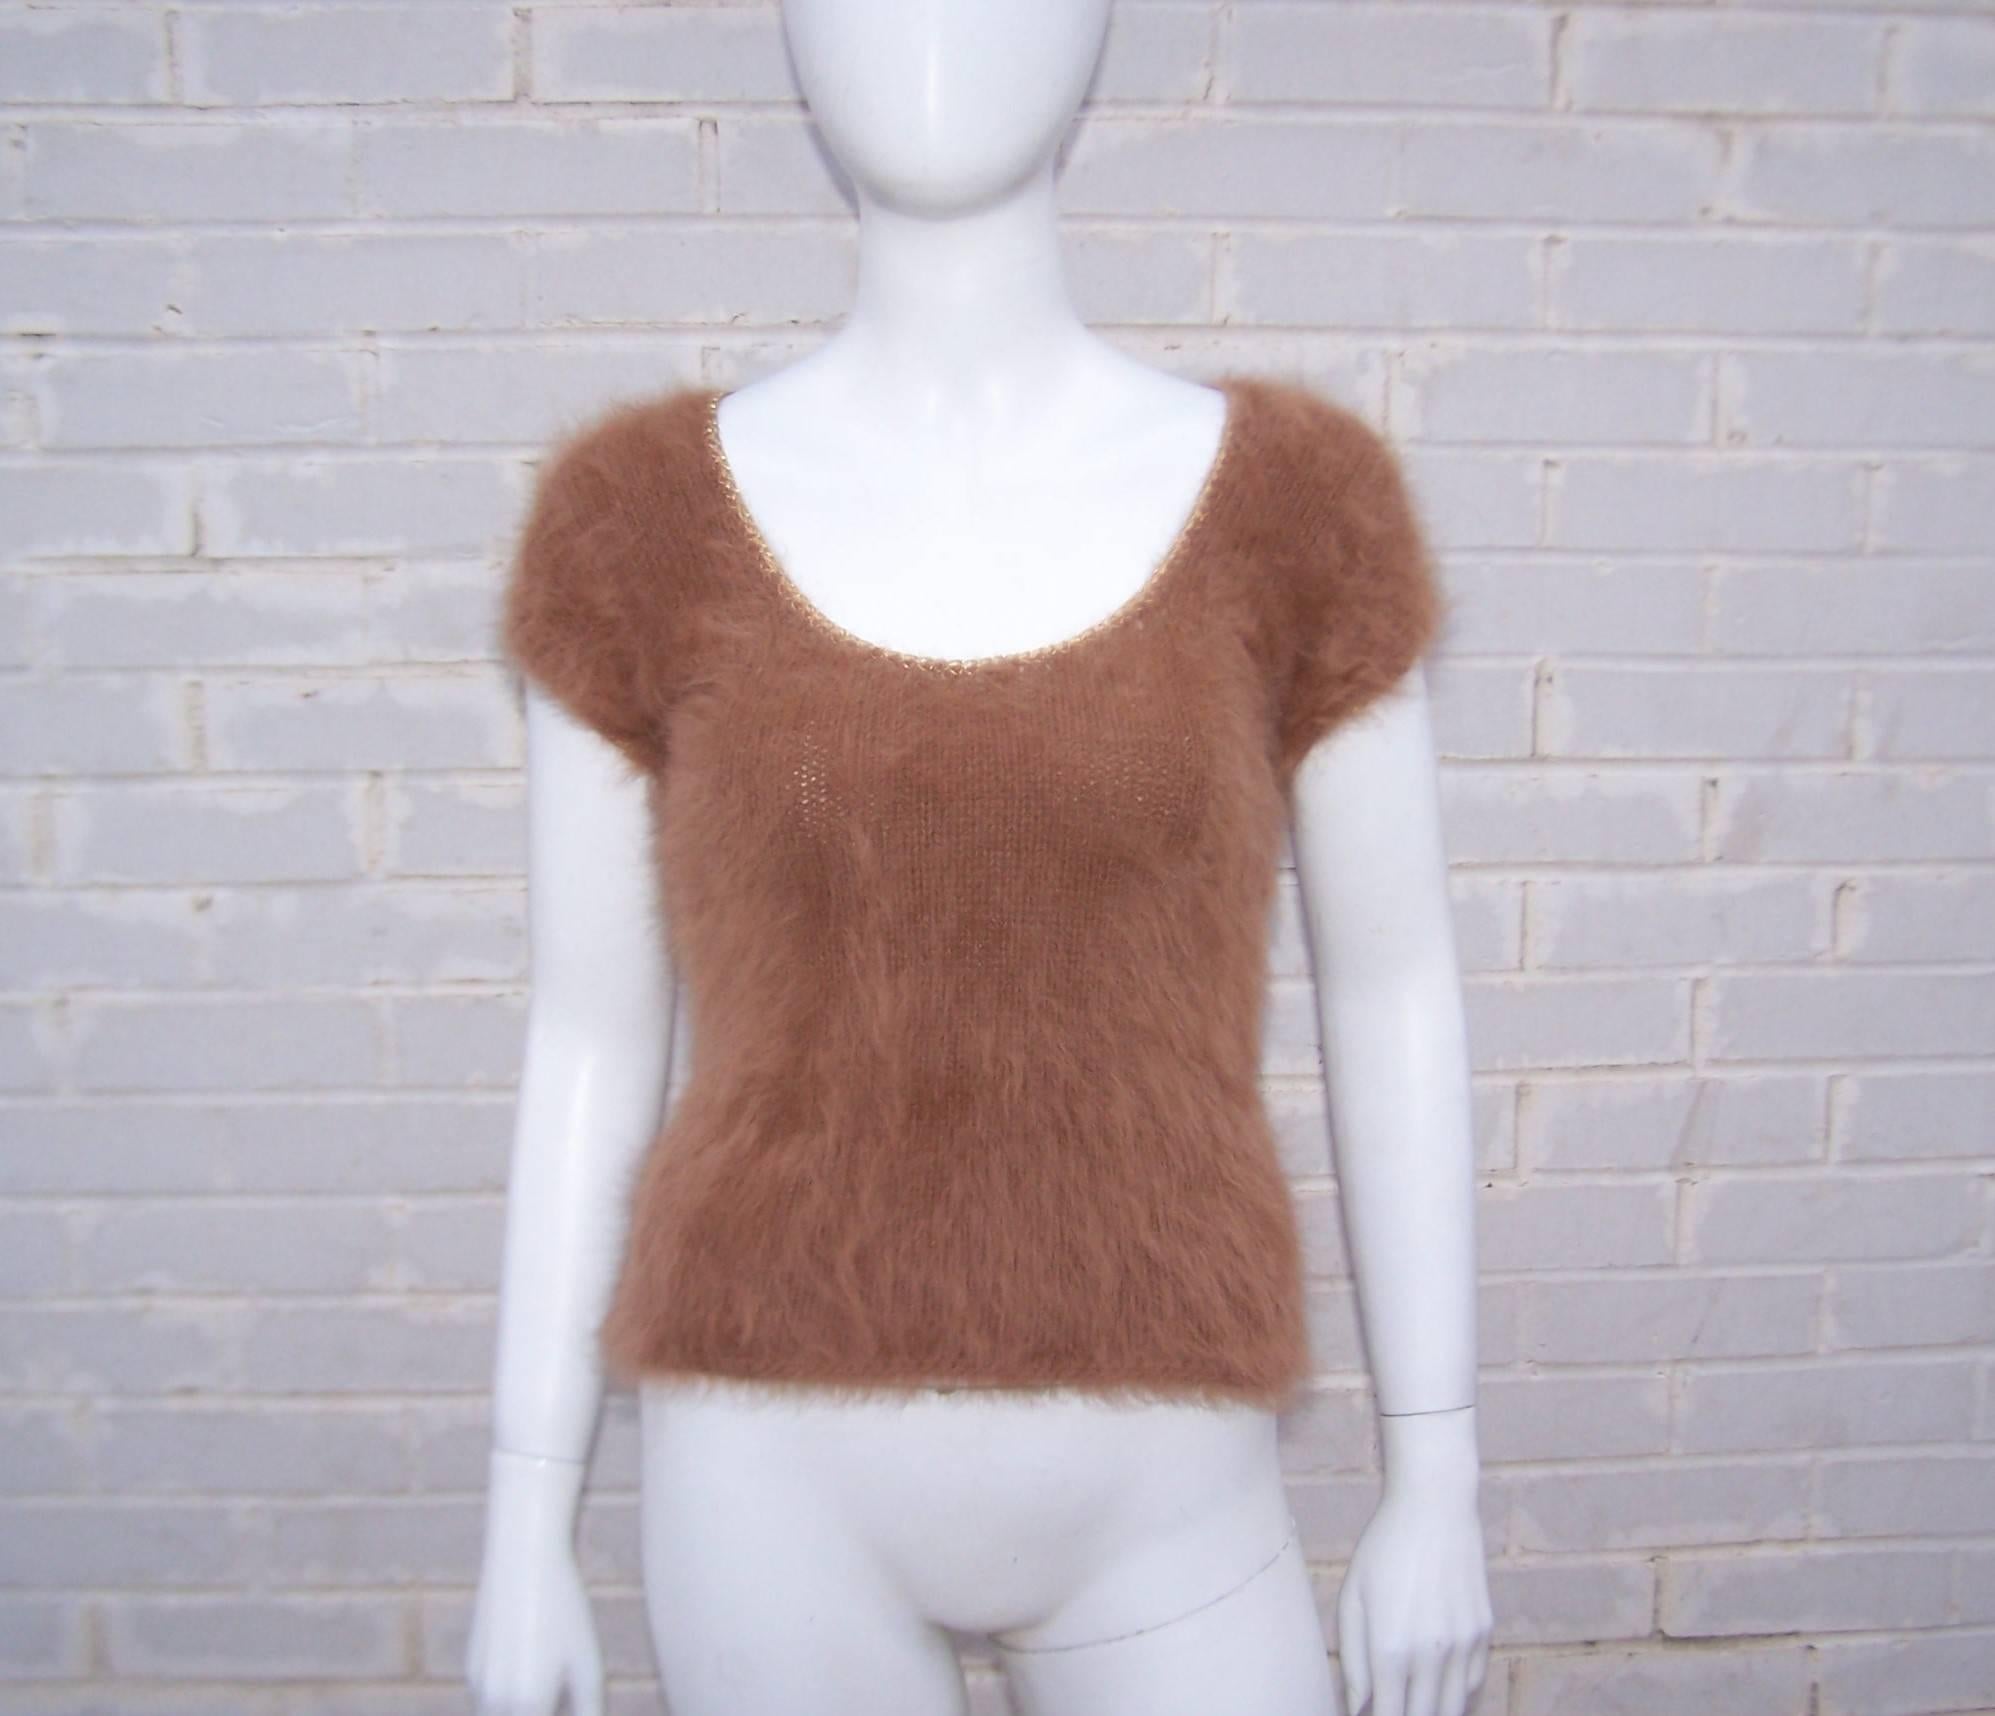 Get prepared to be touched!  This 1970's caramel color angora sweater by Cheryl Baron is irresistible.  The t-shirt style shape features cap sleeves, a scoop neck and easy pull on construction.  The neck and sleeves are trimmed in a gold braid which